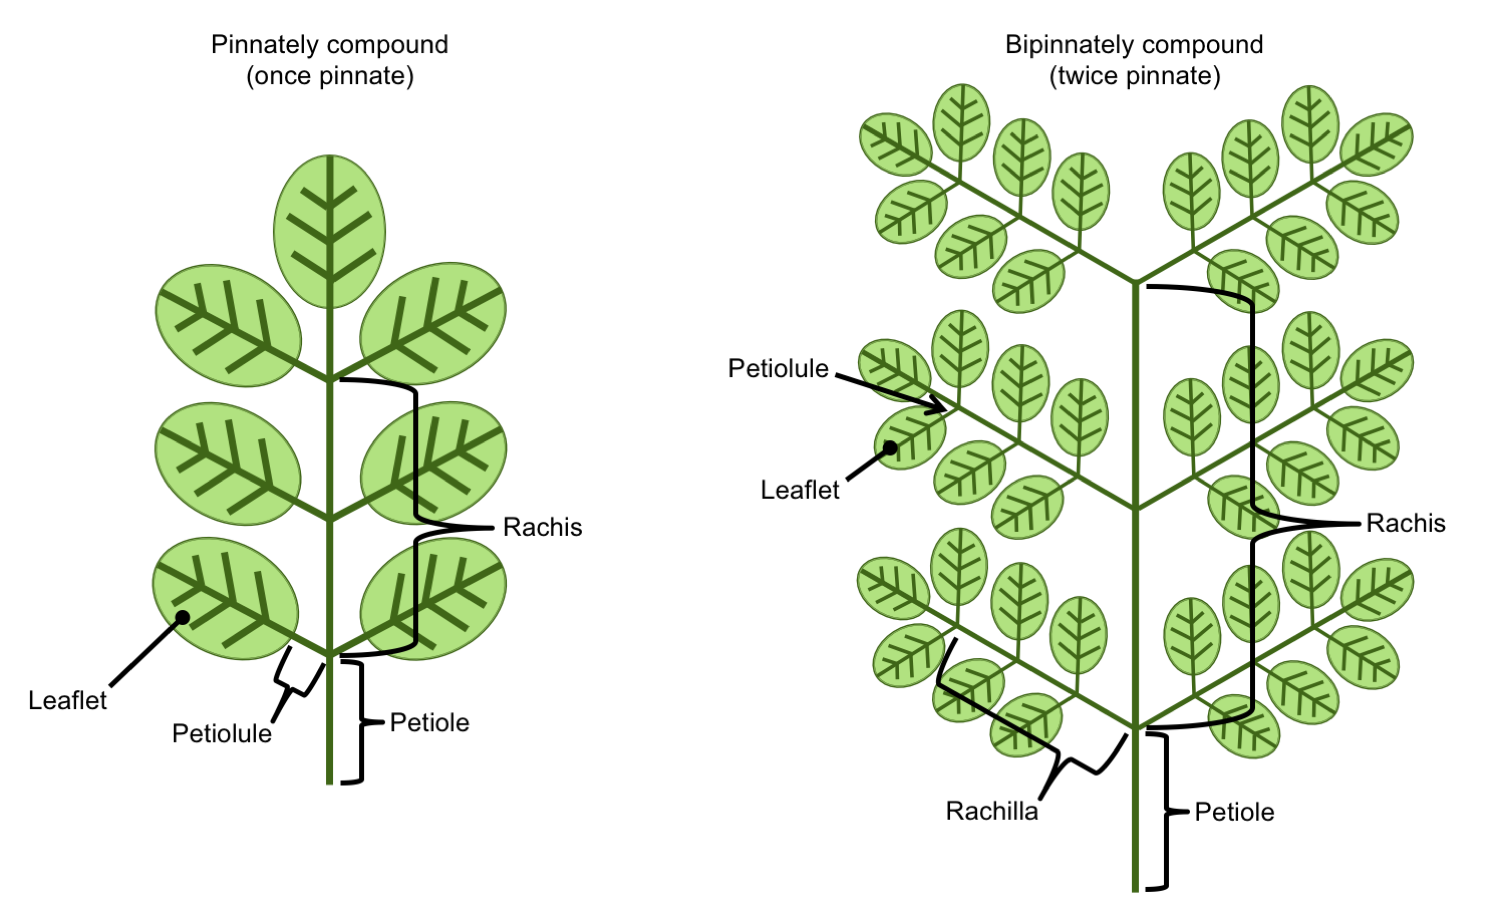 Diagrams showing pinnately compound leaves. Left: Once-pinnately compound leaf. Right: Twice-pinnately compound leaf (bipinnately compound leaf).